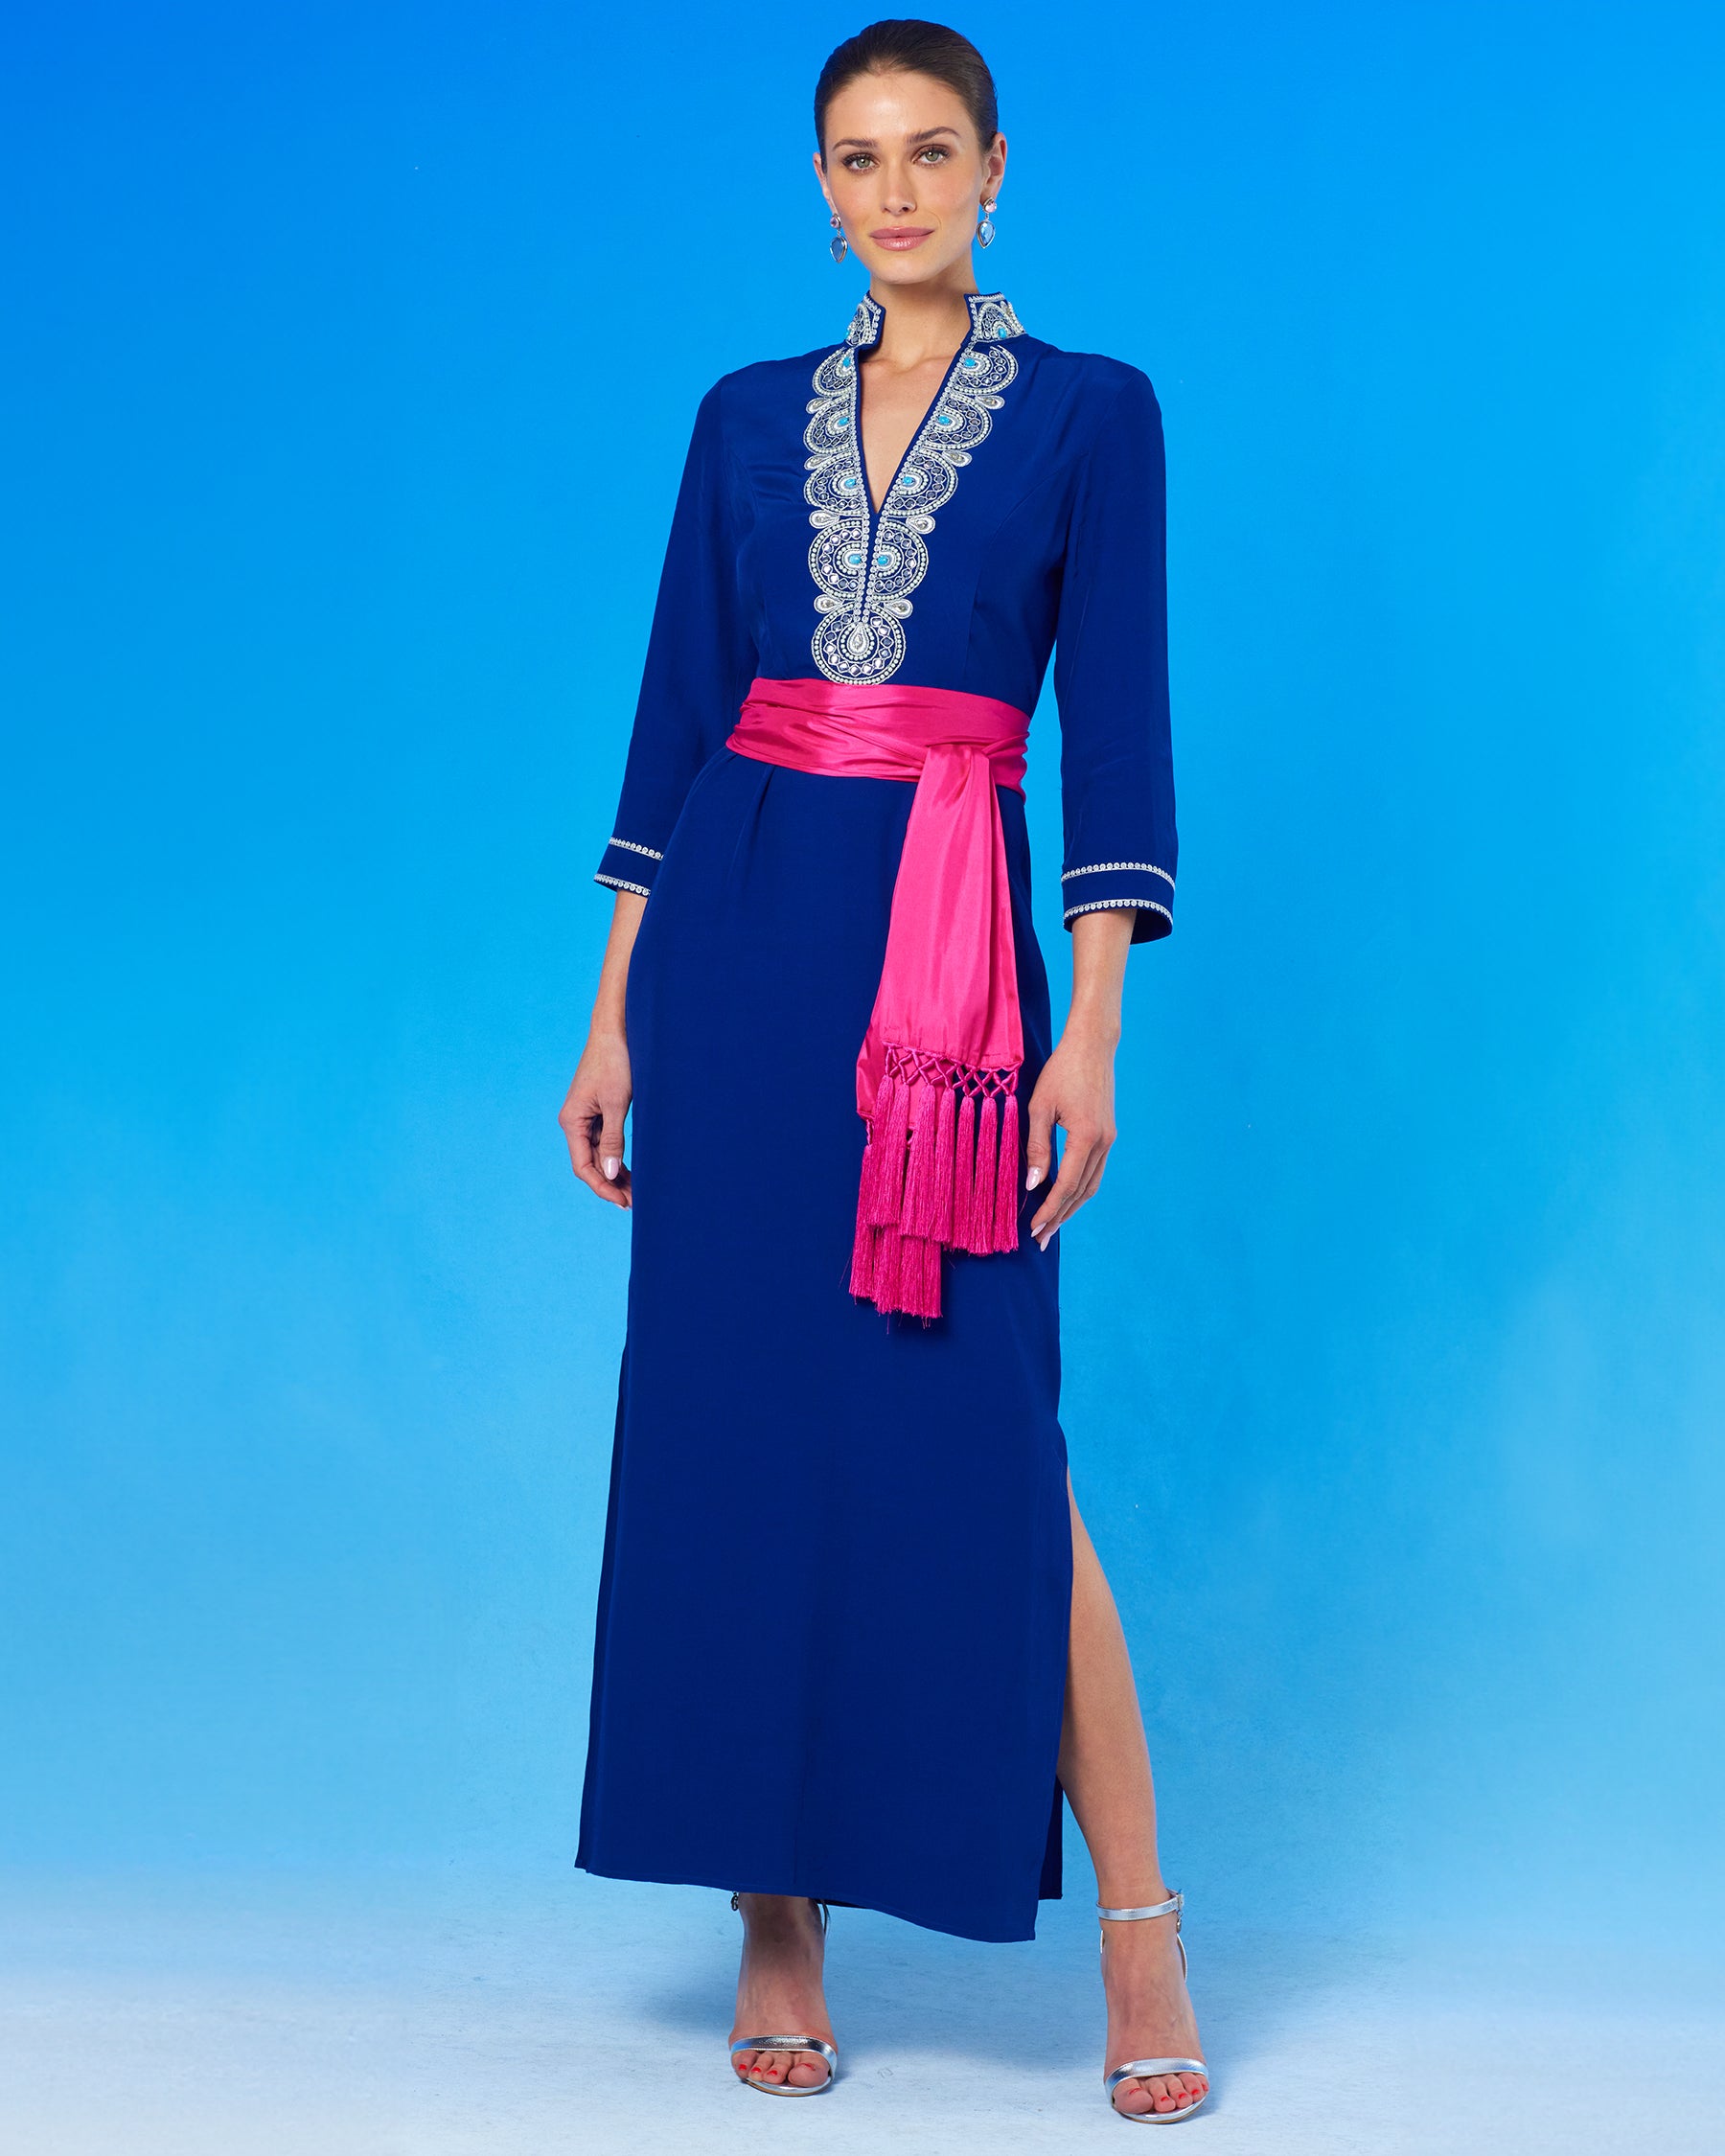 Noor Long Navy Tunic Dress with Silver Embellishment with the waist cinched with the Cosima Sash Belt in Fuchsia Hot Pink